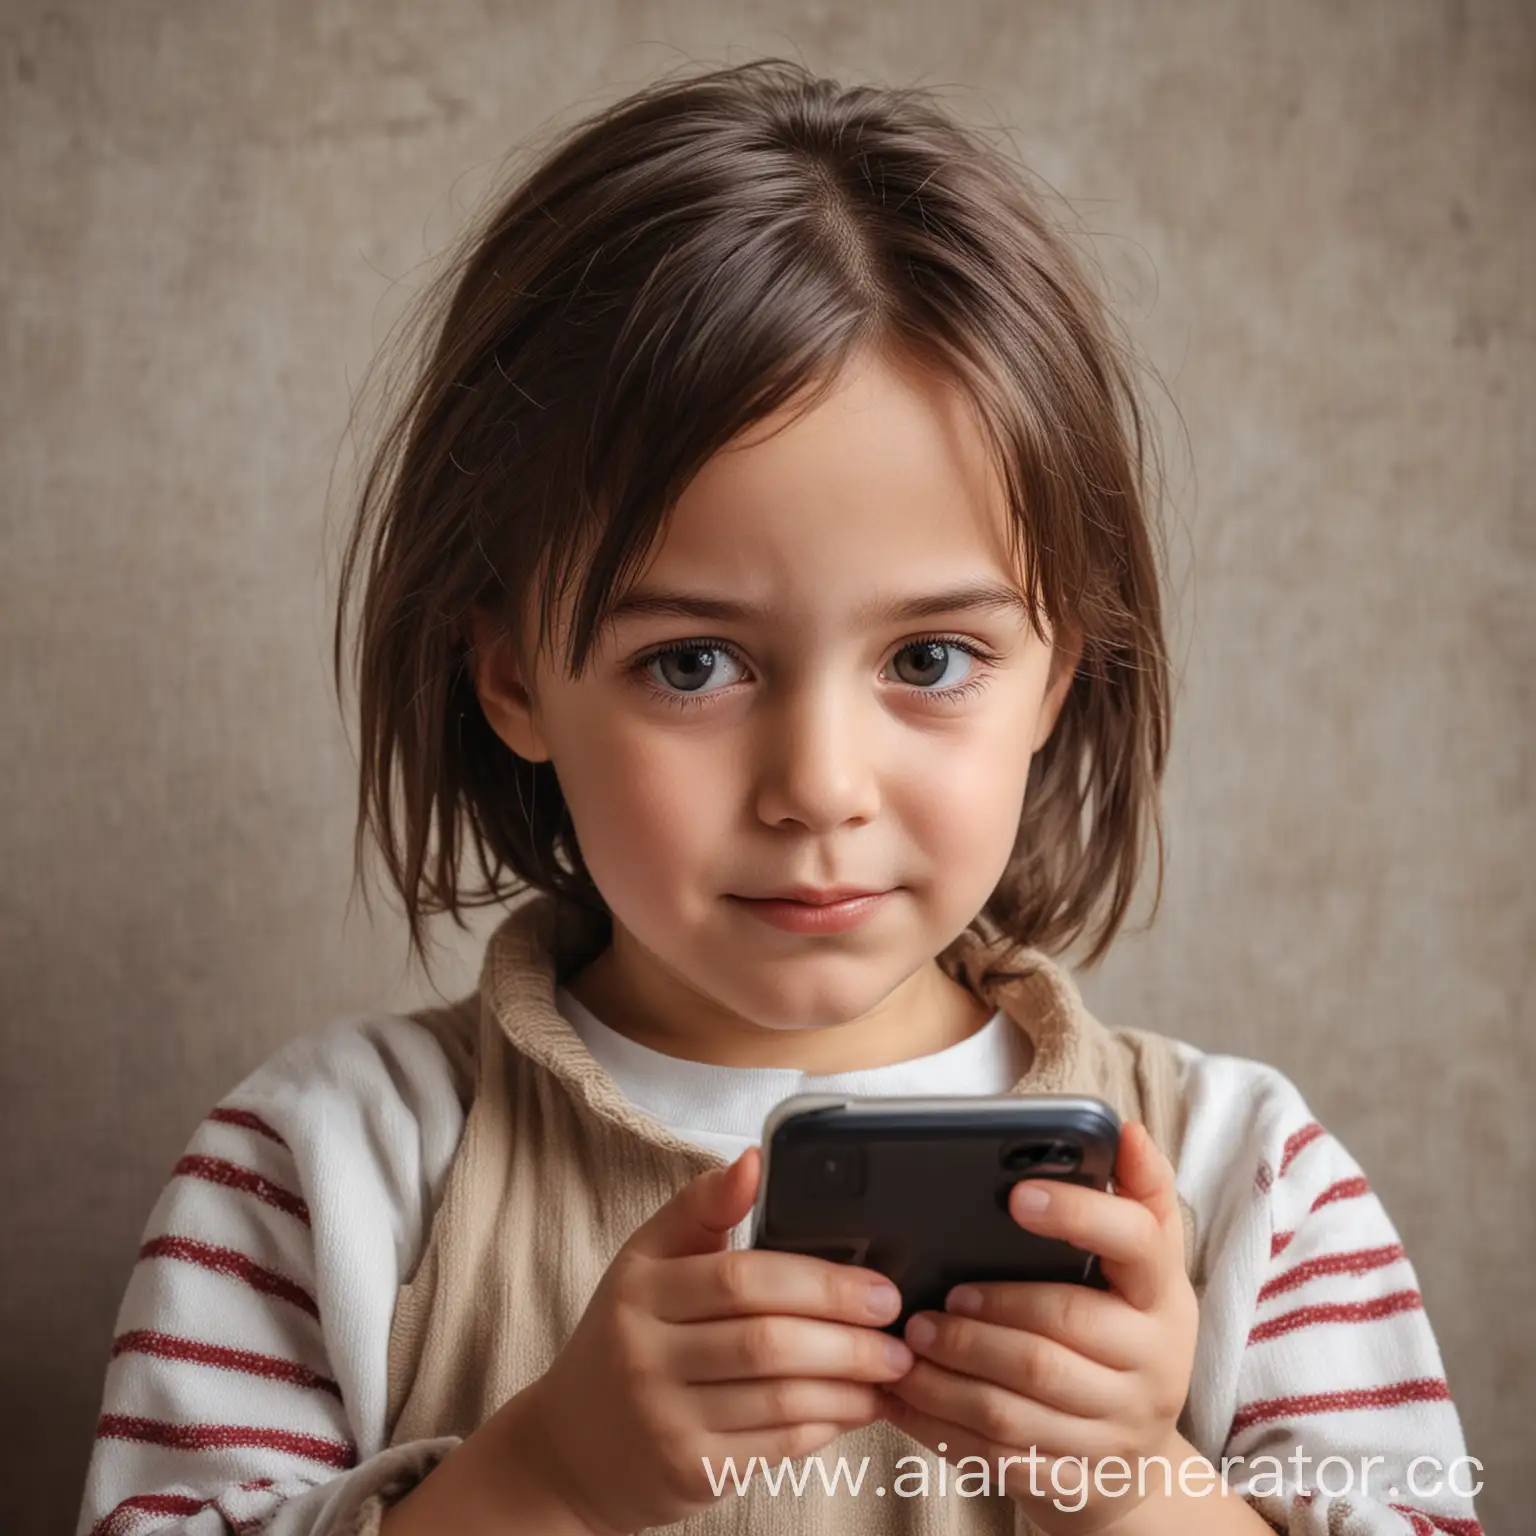 Young-Child-Consuming-LowQuality-Internet-Content-on-Smartphone